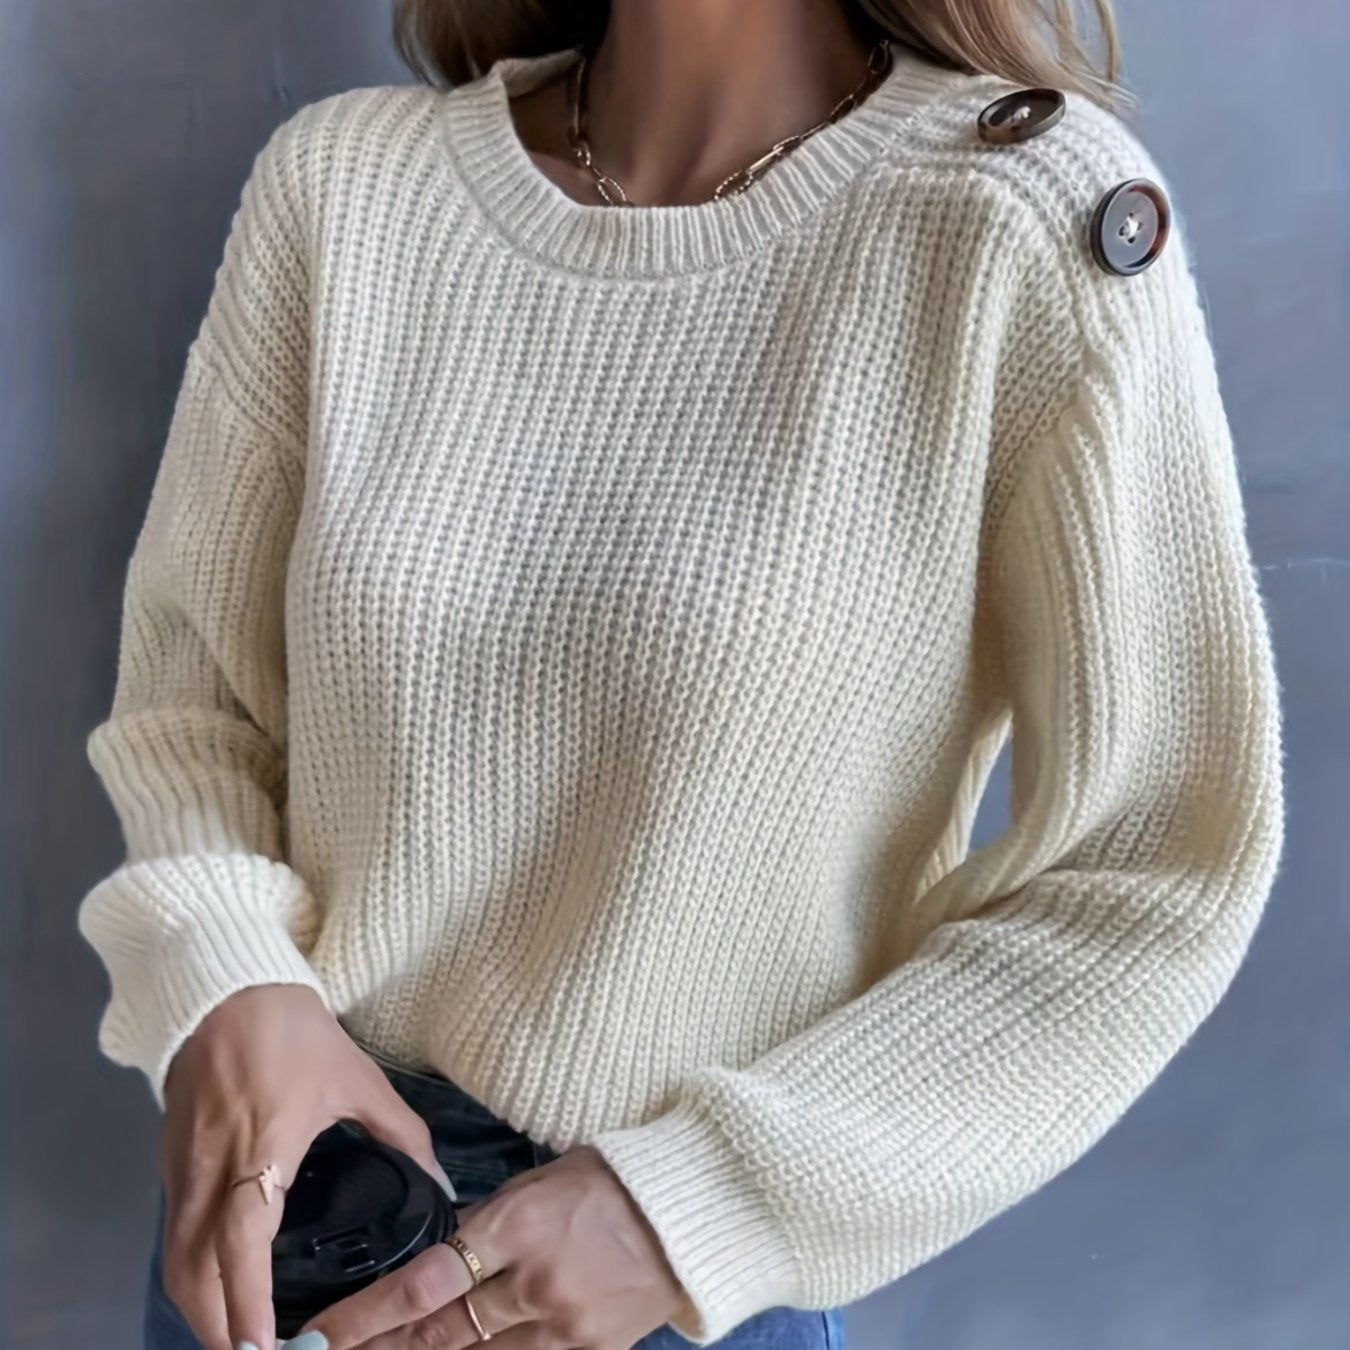 Antmvs Drop Shoulder Button Decor Sweater, Casual Long Sleeve Sweater For Fall & Winter, Women's Clothing